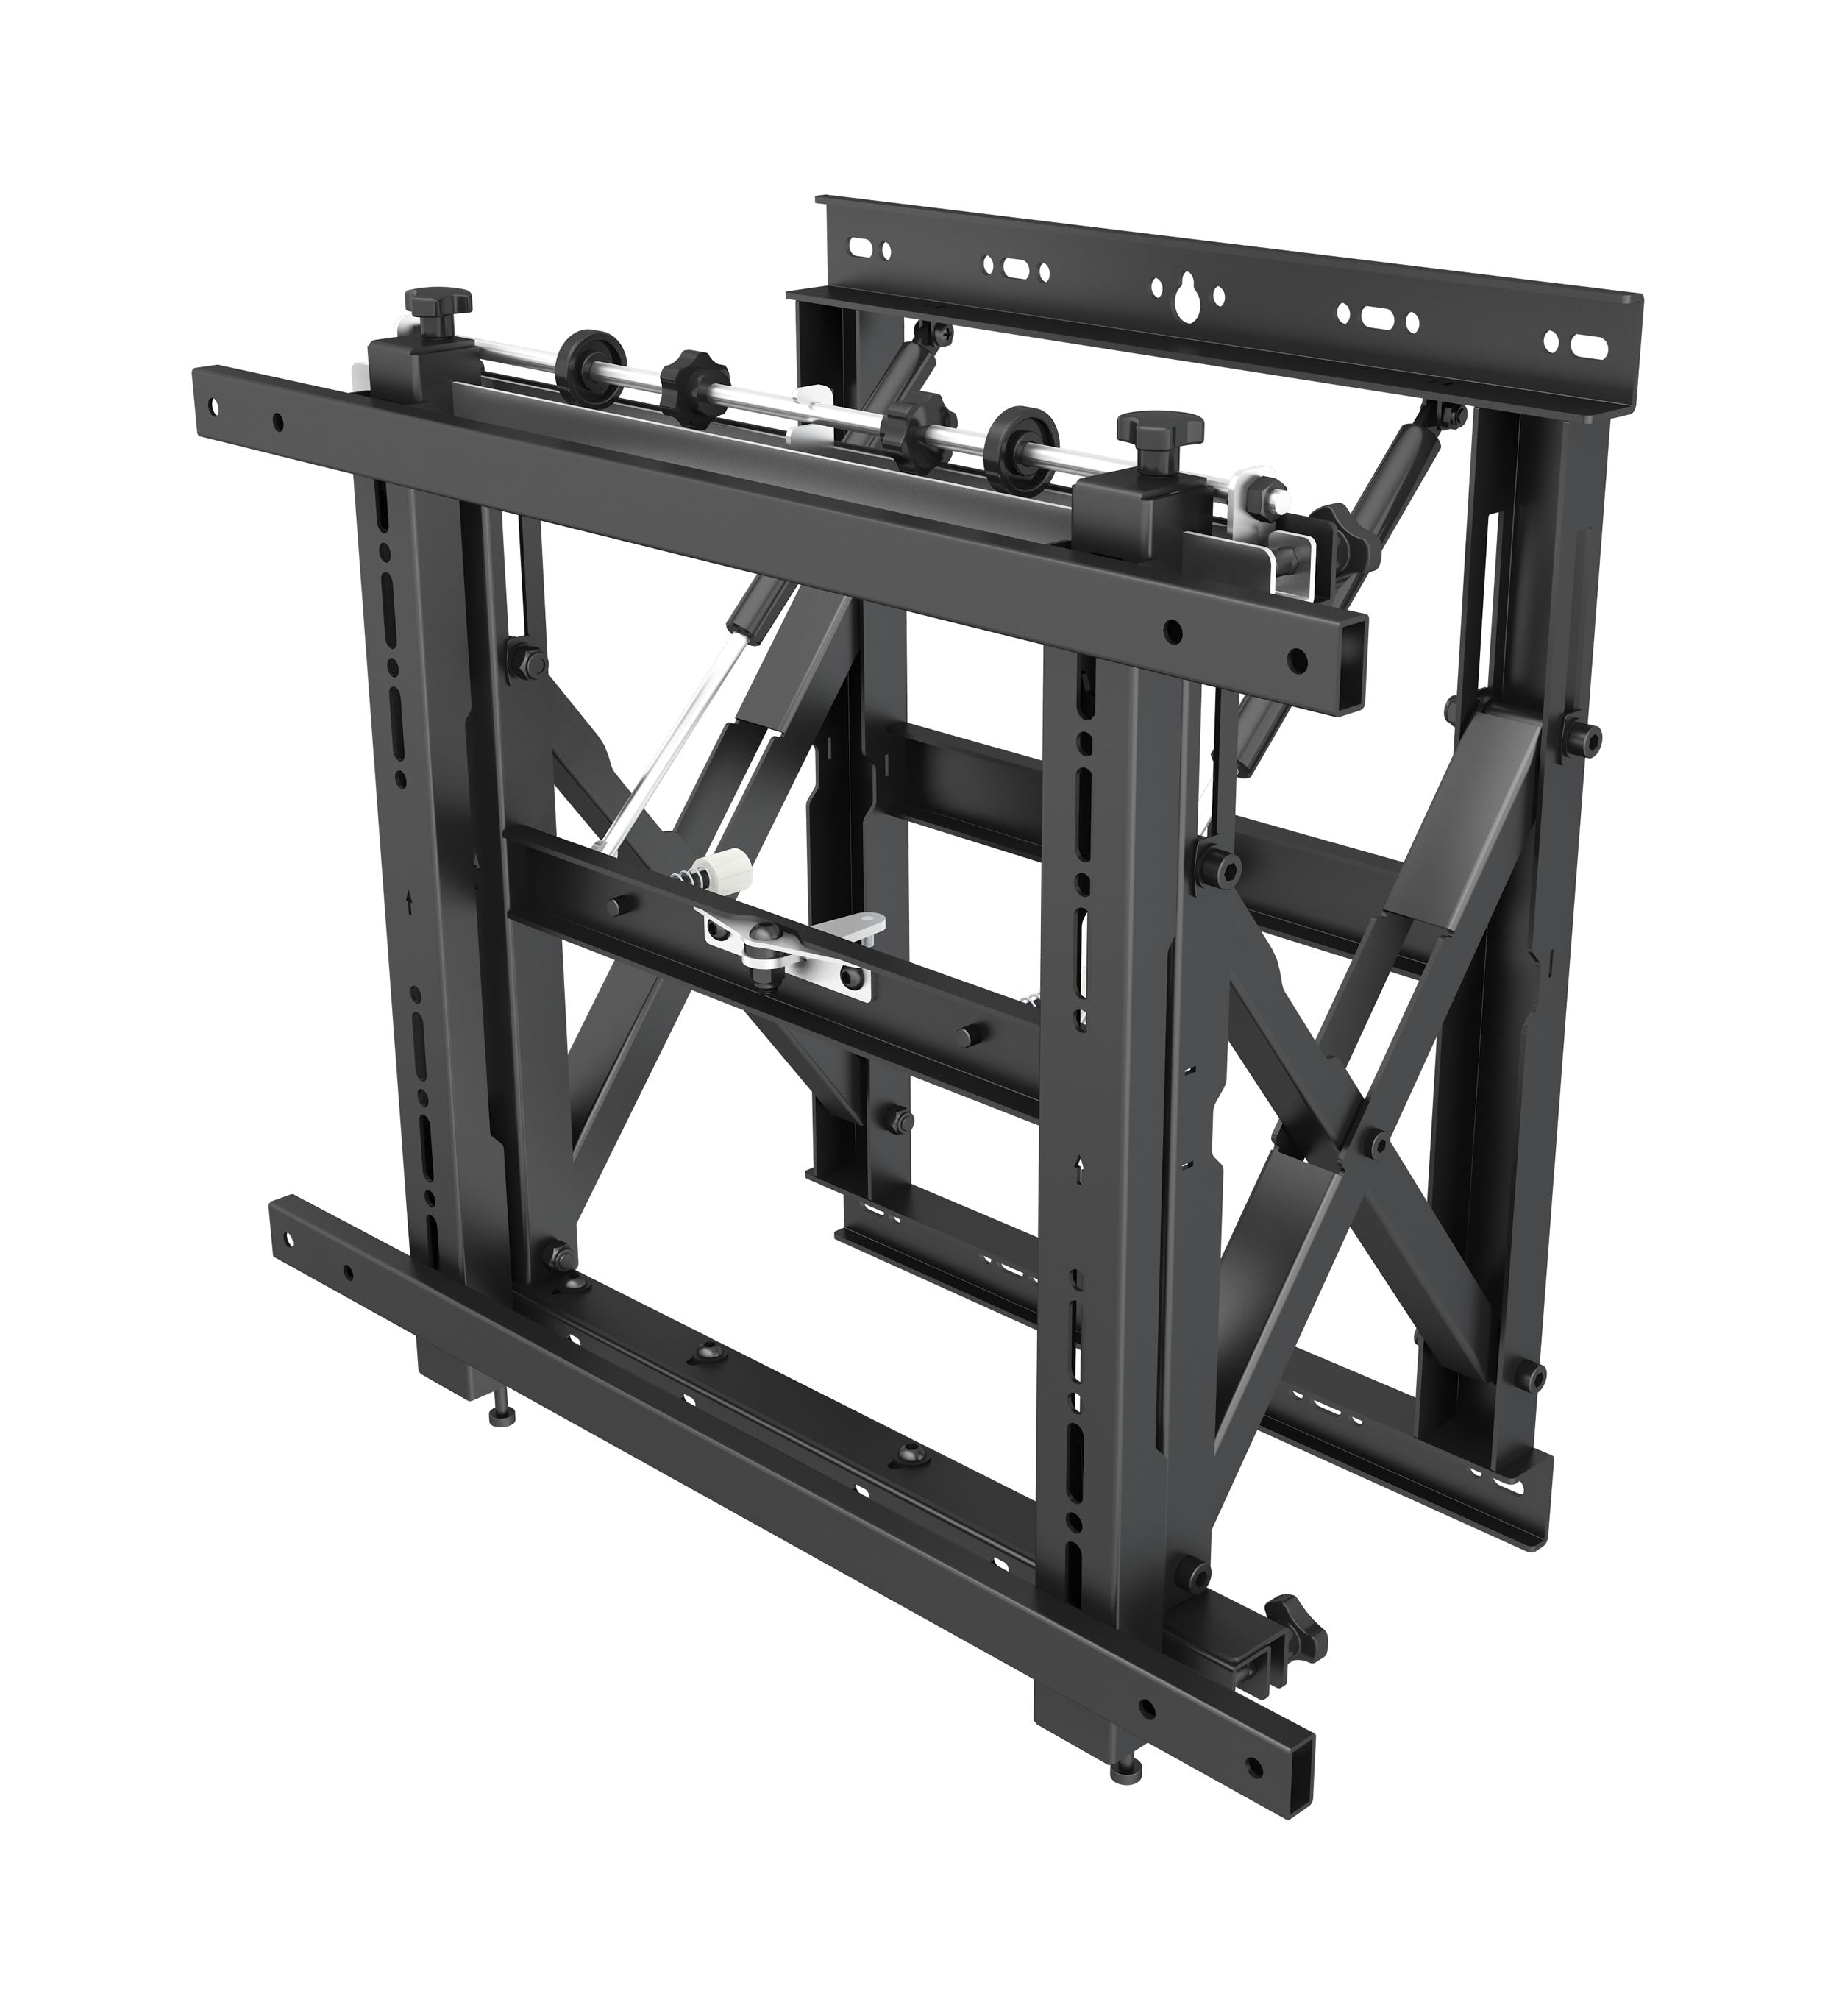 64-1160 Commercial Video Wall Bracket for 42-70 inches Screens